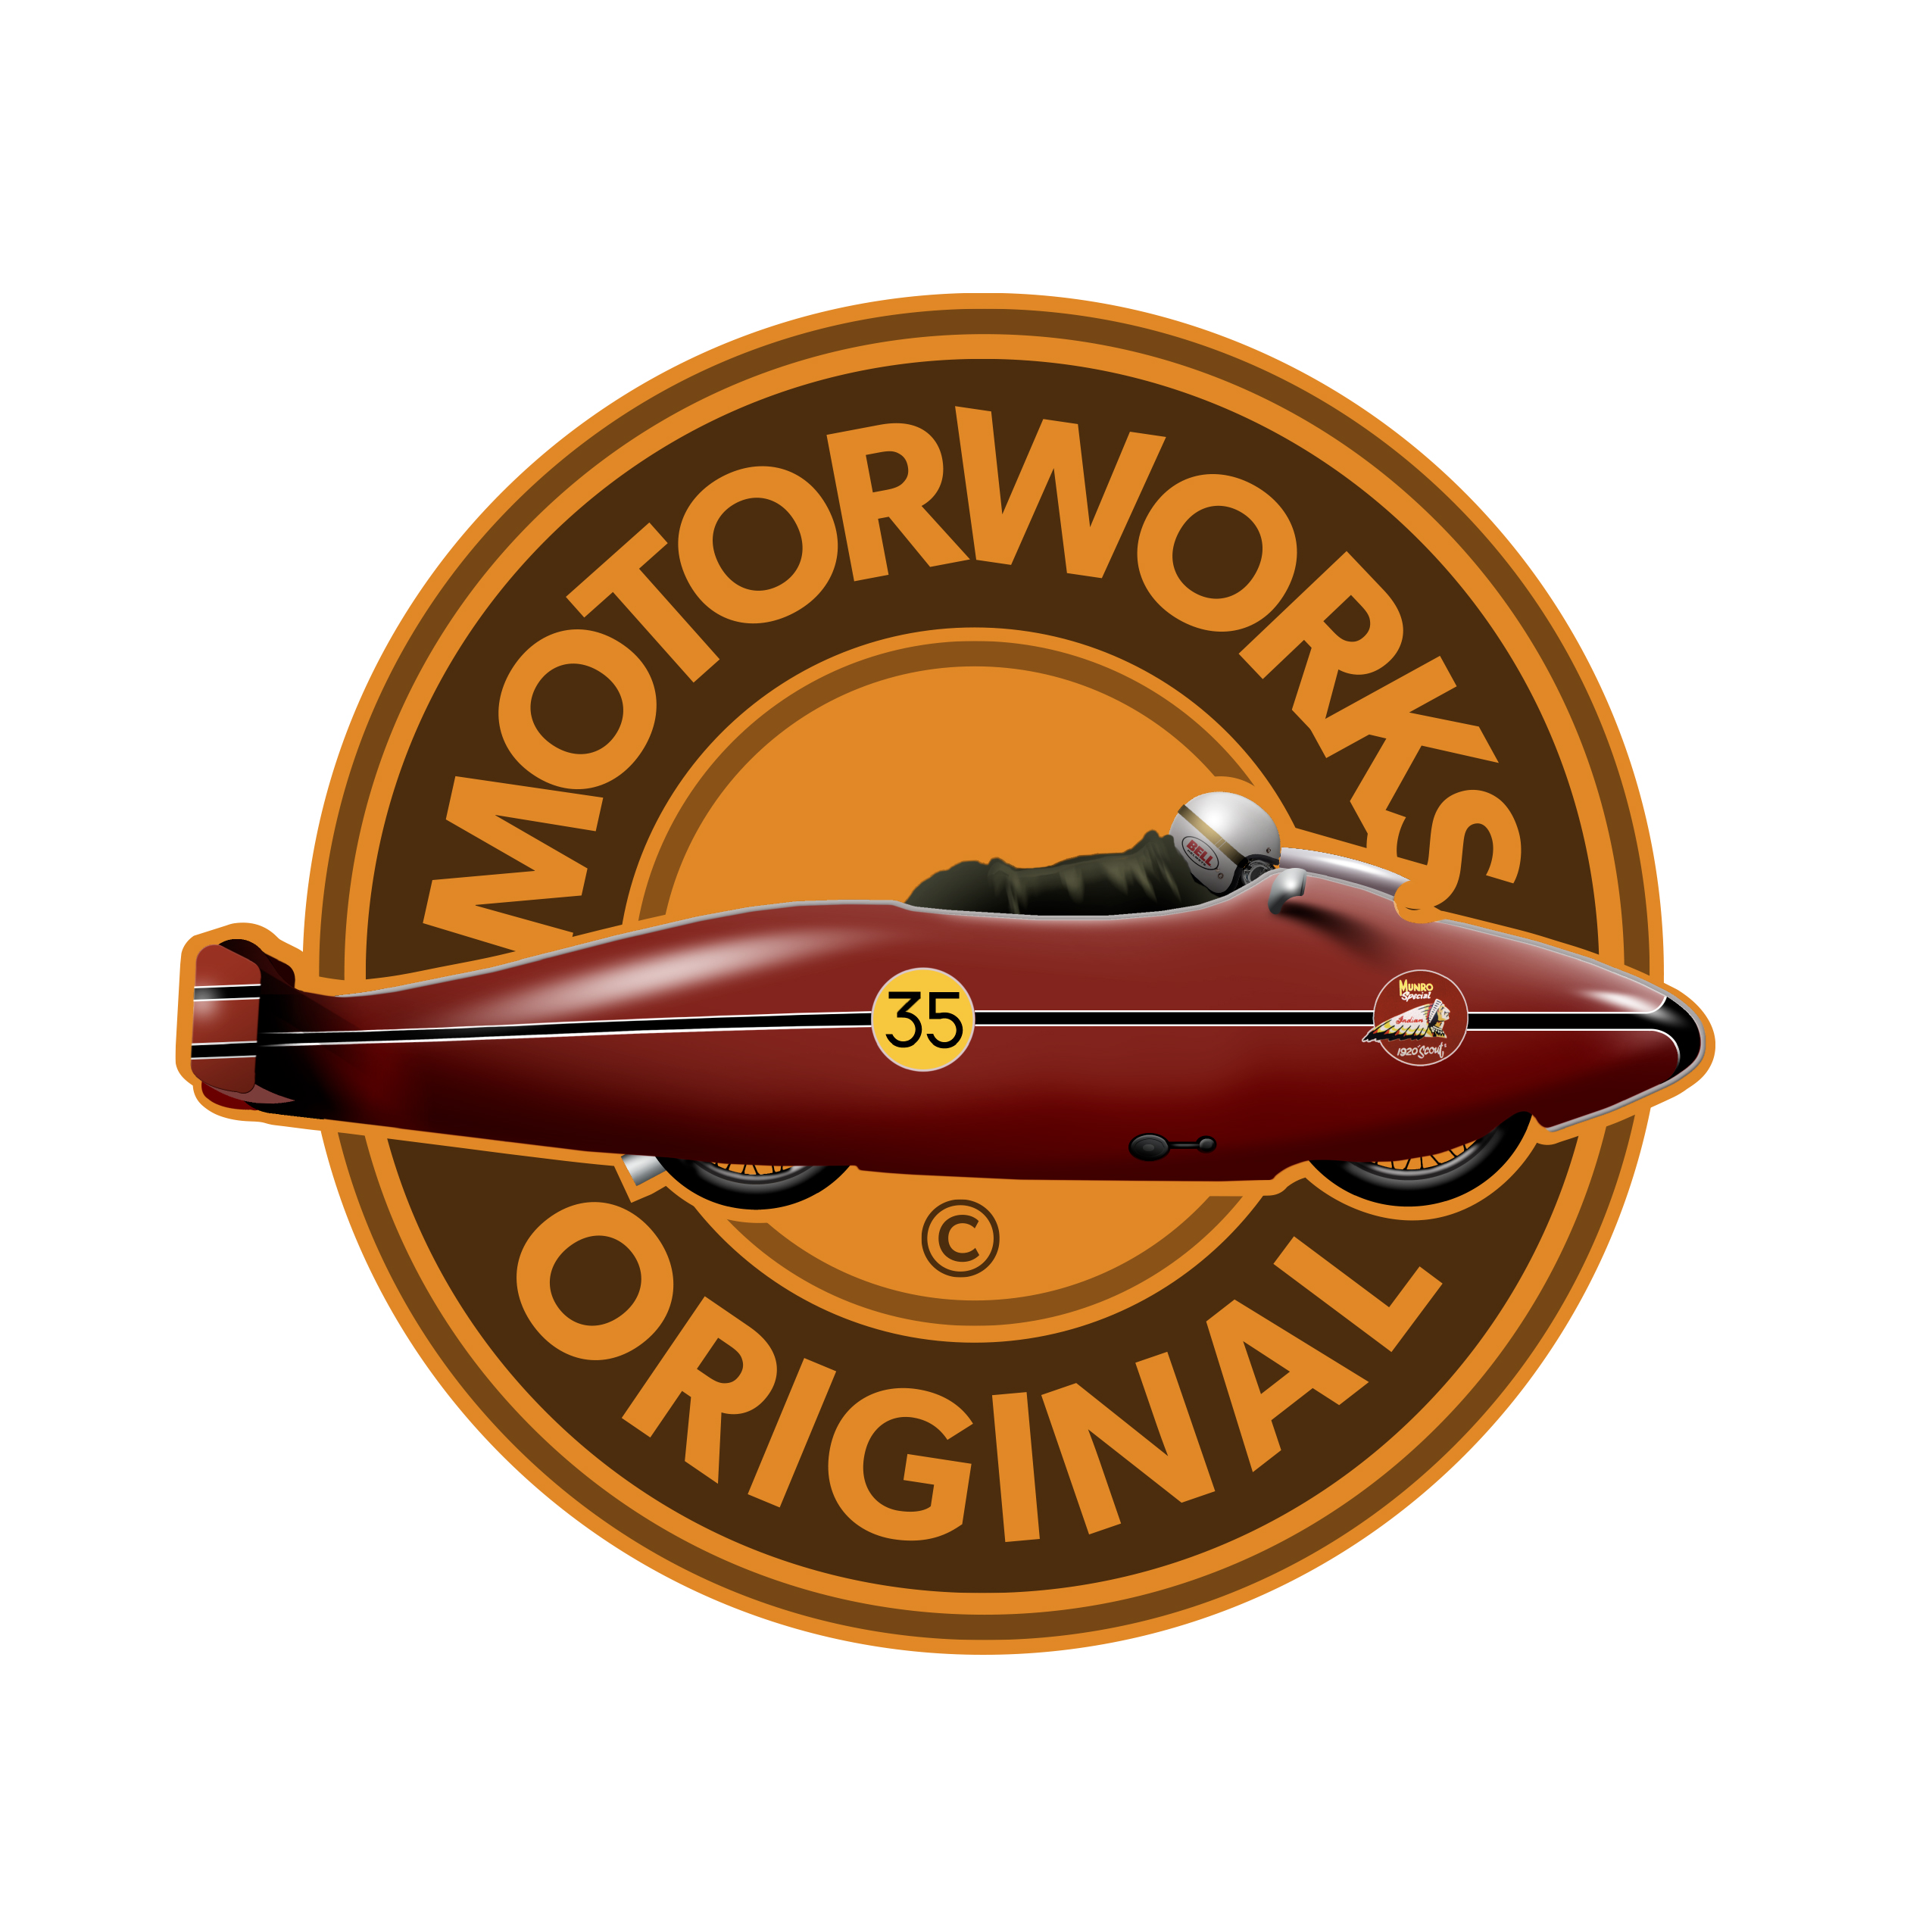 Motorworks Original logo design by logo designer Yellow Pencil Brand Sharpening for your inspiration and for the worlds largest logo competition